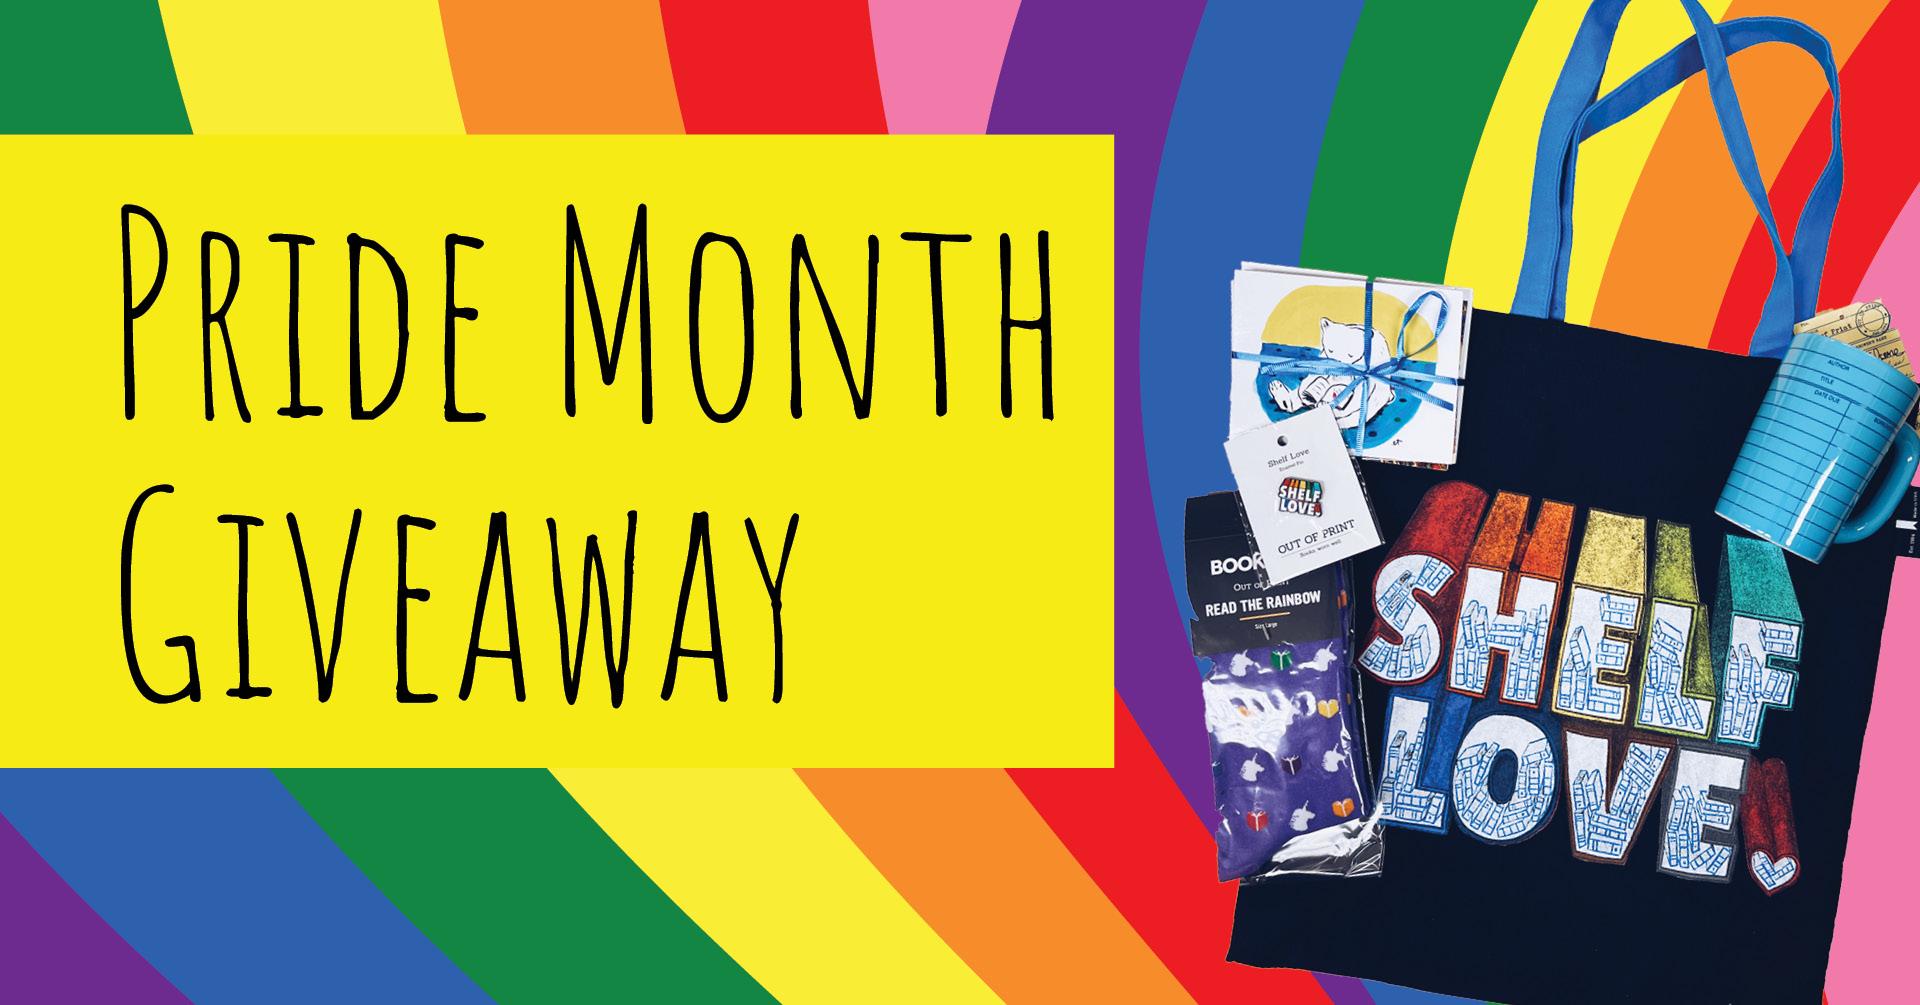 Text says "Pride Month Giveaway" over a rainbow background with a photo of a Pride-themed giveaway items including a "Shelf Love" tote bag, pin, socks, and mug 